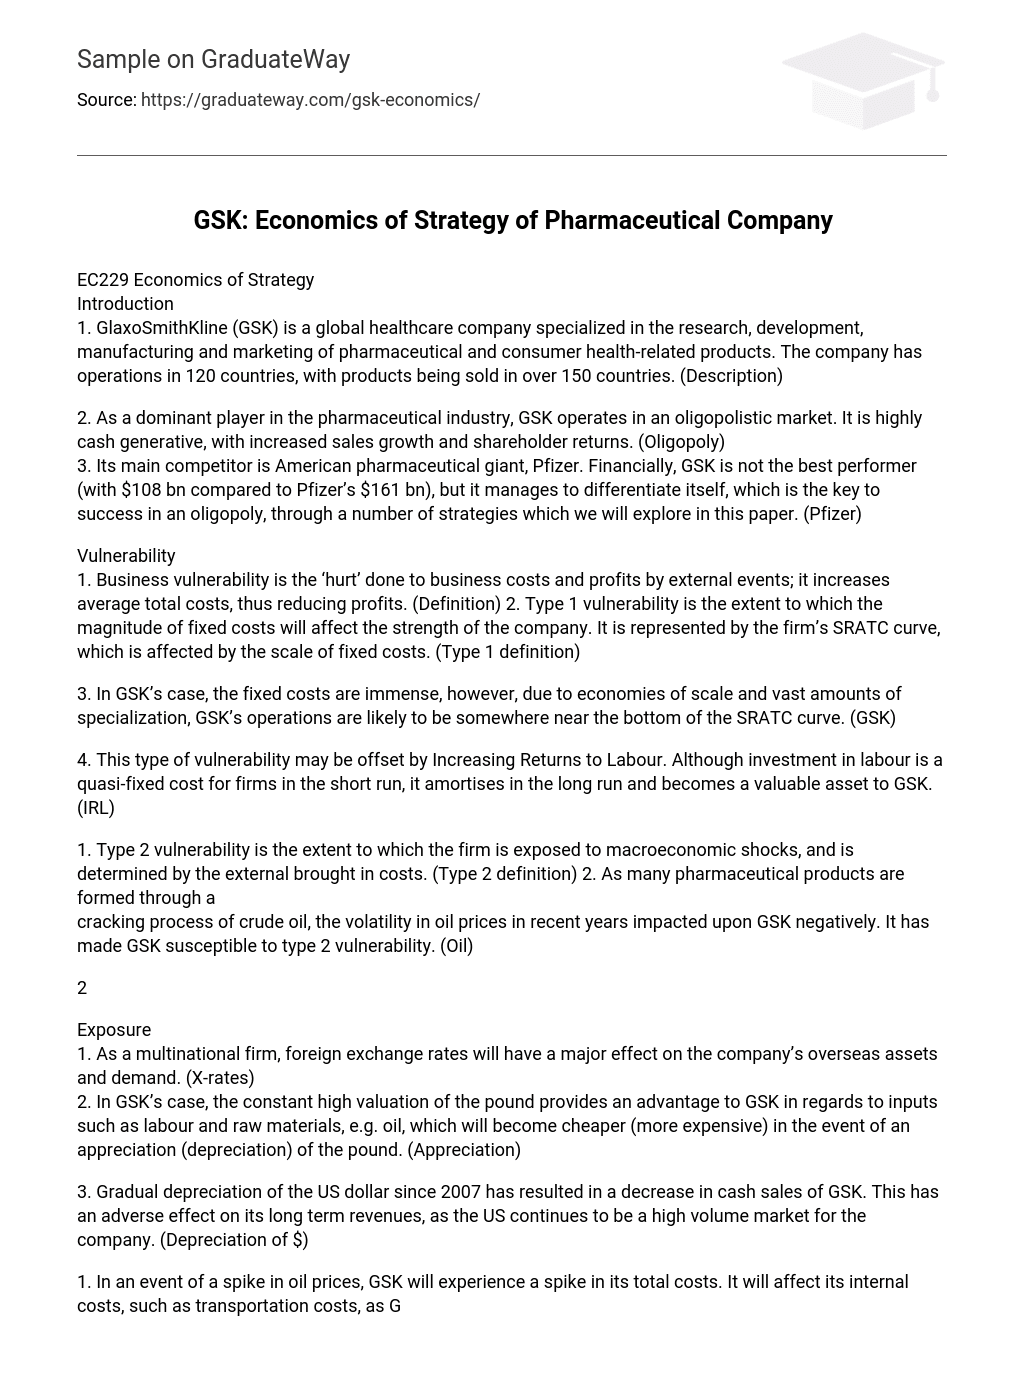 GSK: Economics of Strategy of Pharmaceutical Company